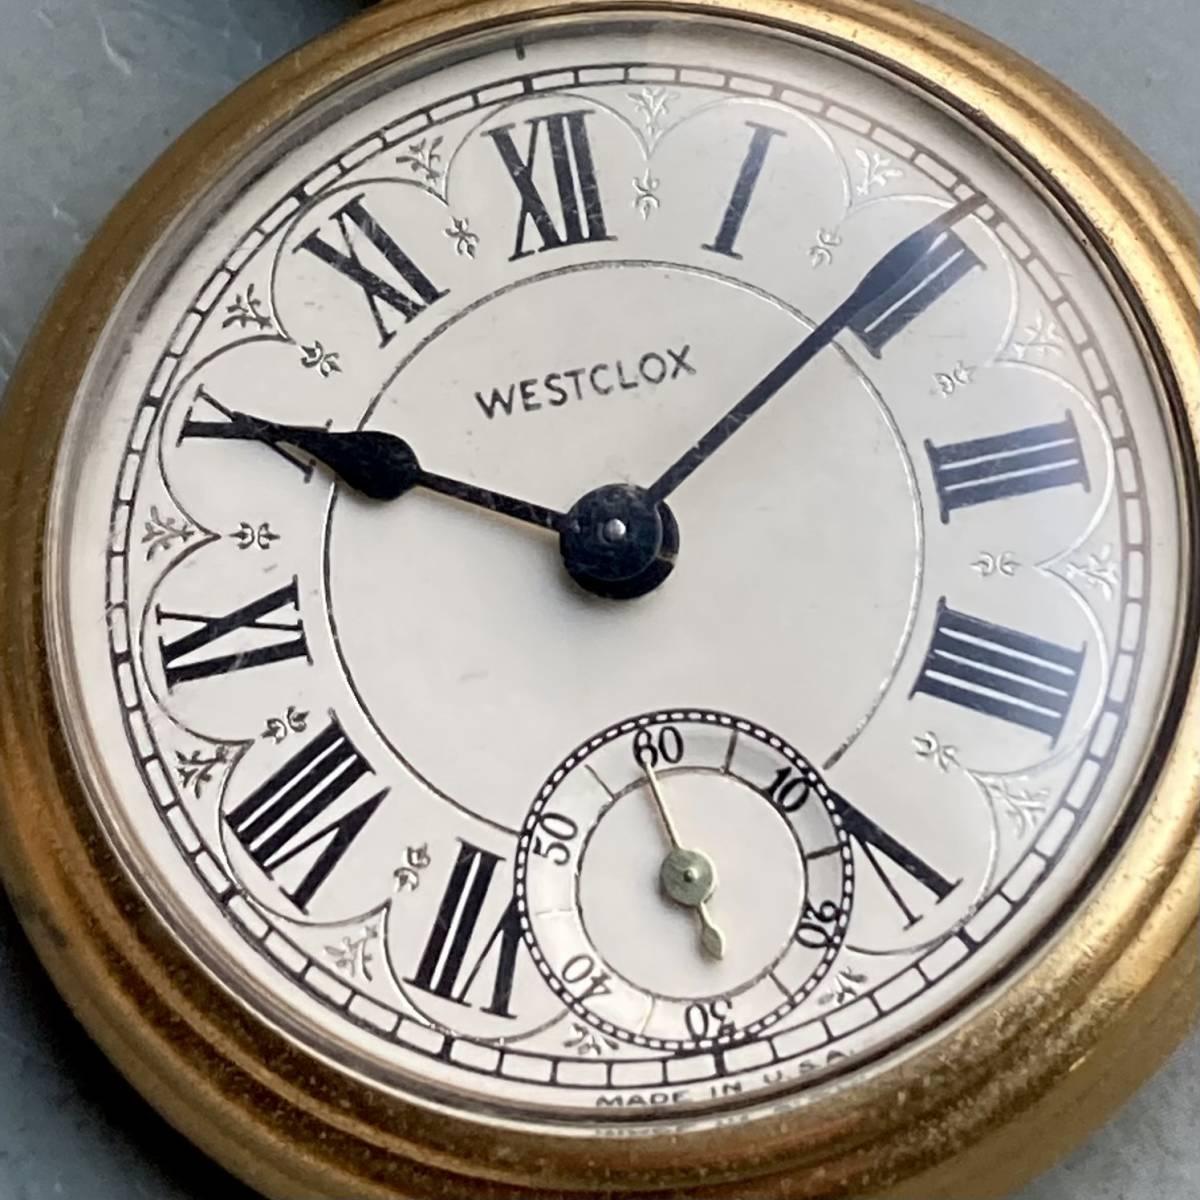 Vintage Pocket Watch Antique Westclox Manual 50mm Watch Vintage Gold - Murphy Johnson Watches Co.